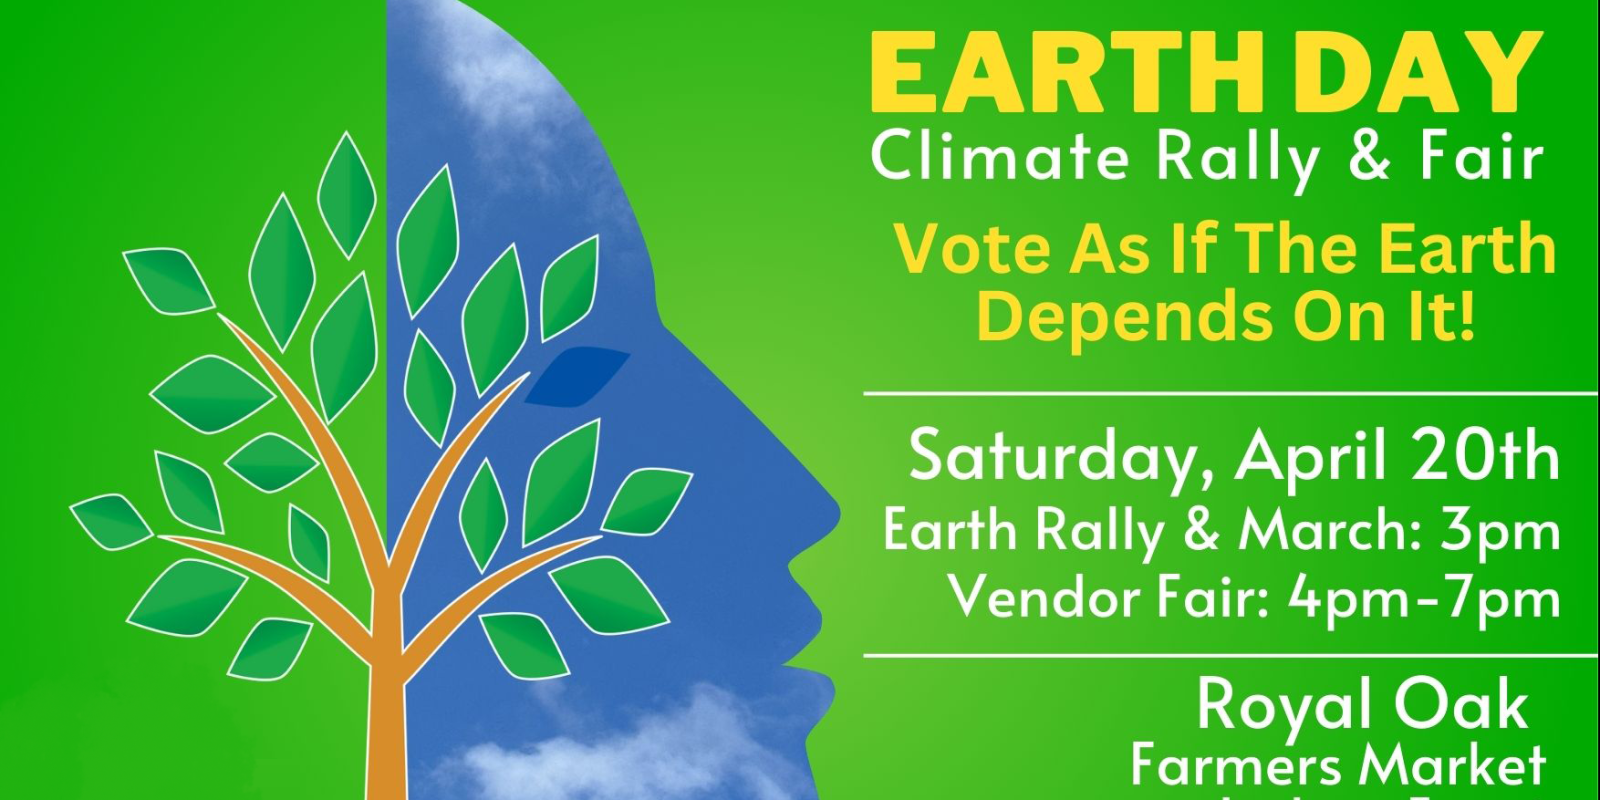 Earth Day Climate Rally and Fair, Vote As If The Earth Depends On It! Saturday April 20th, Rally and March 3pm Vendor Fair 4-7pm, Royal Oak Farmers Market